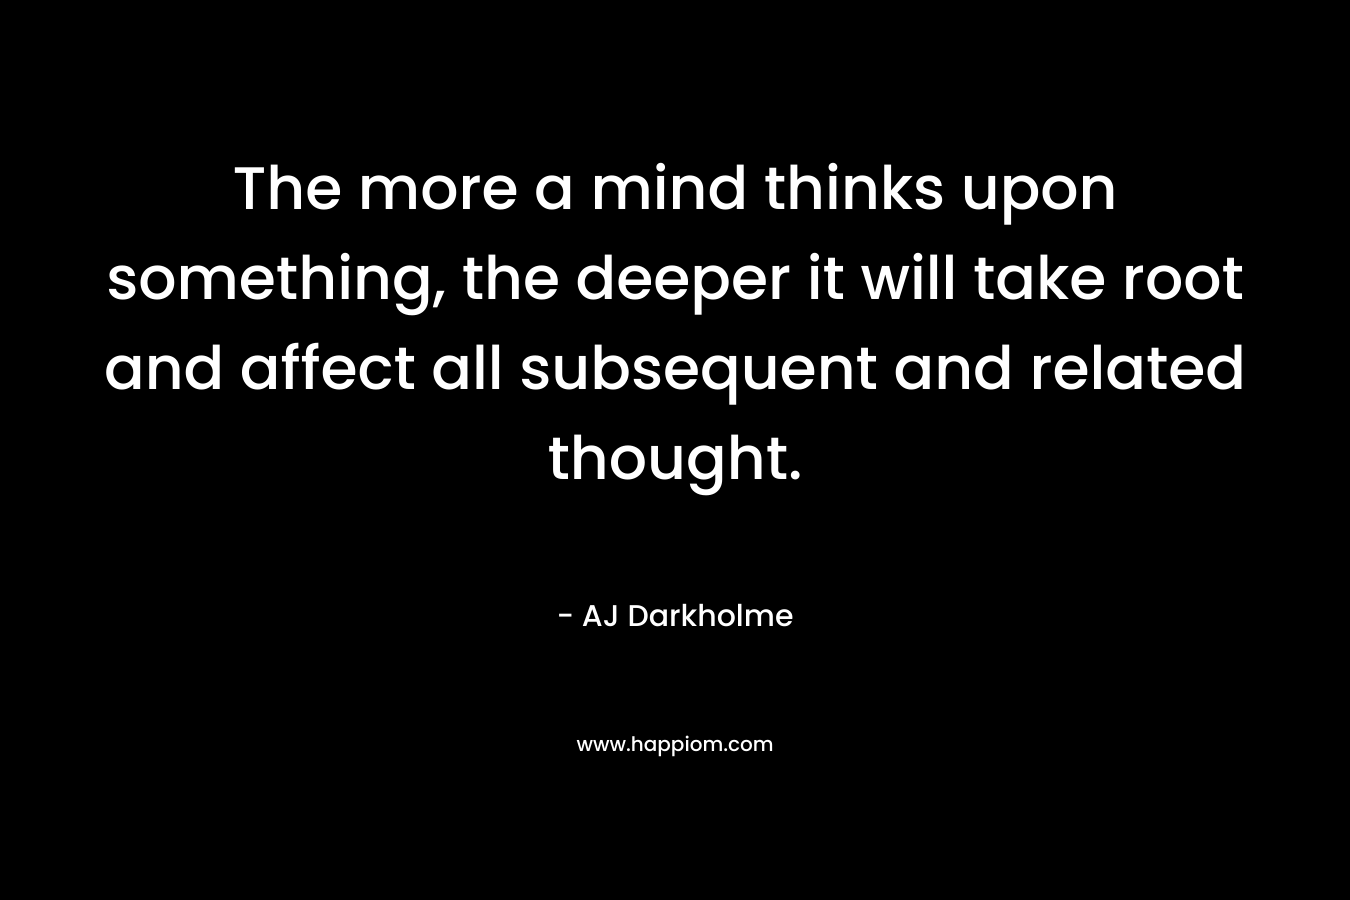 The more a mind thinks upon something, the deeper it will take root and affect all subsequent and related thought.